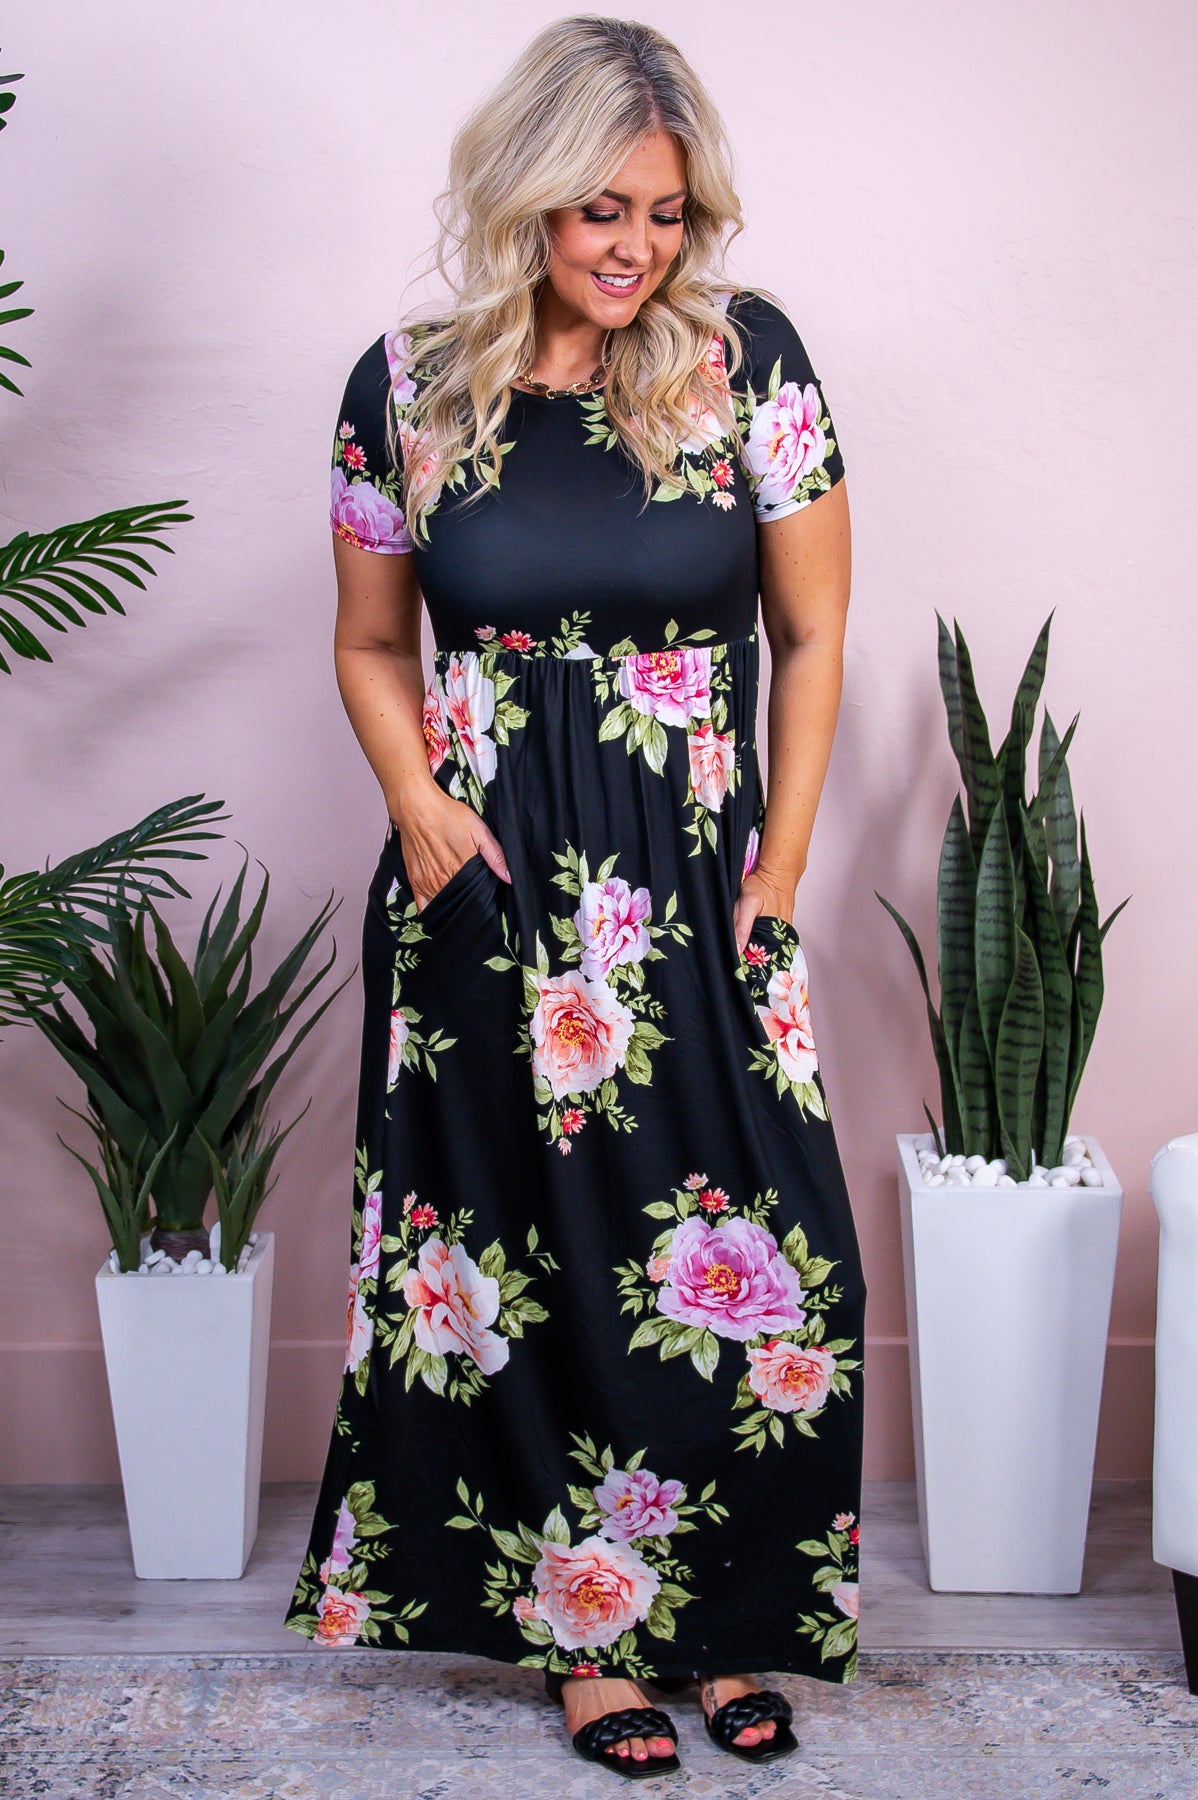 Southern Countryside Black/Multi Color Floral Maxi Dress - D5468BK